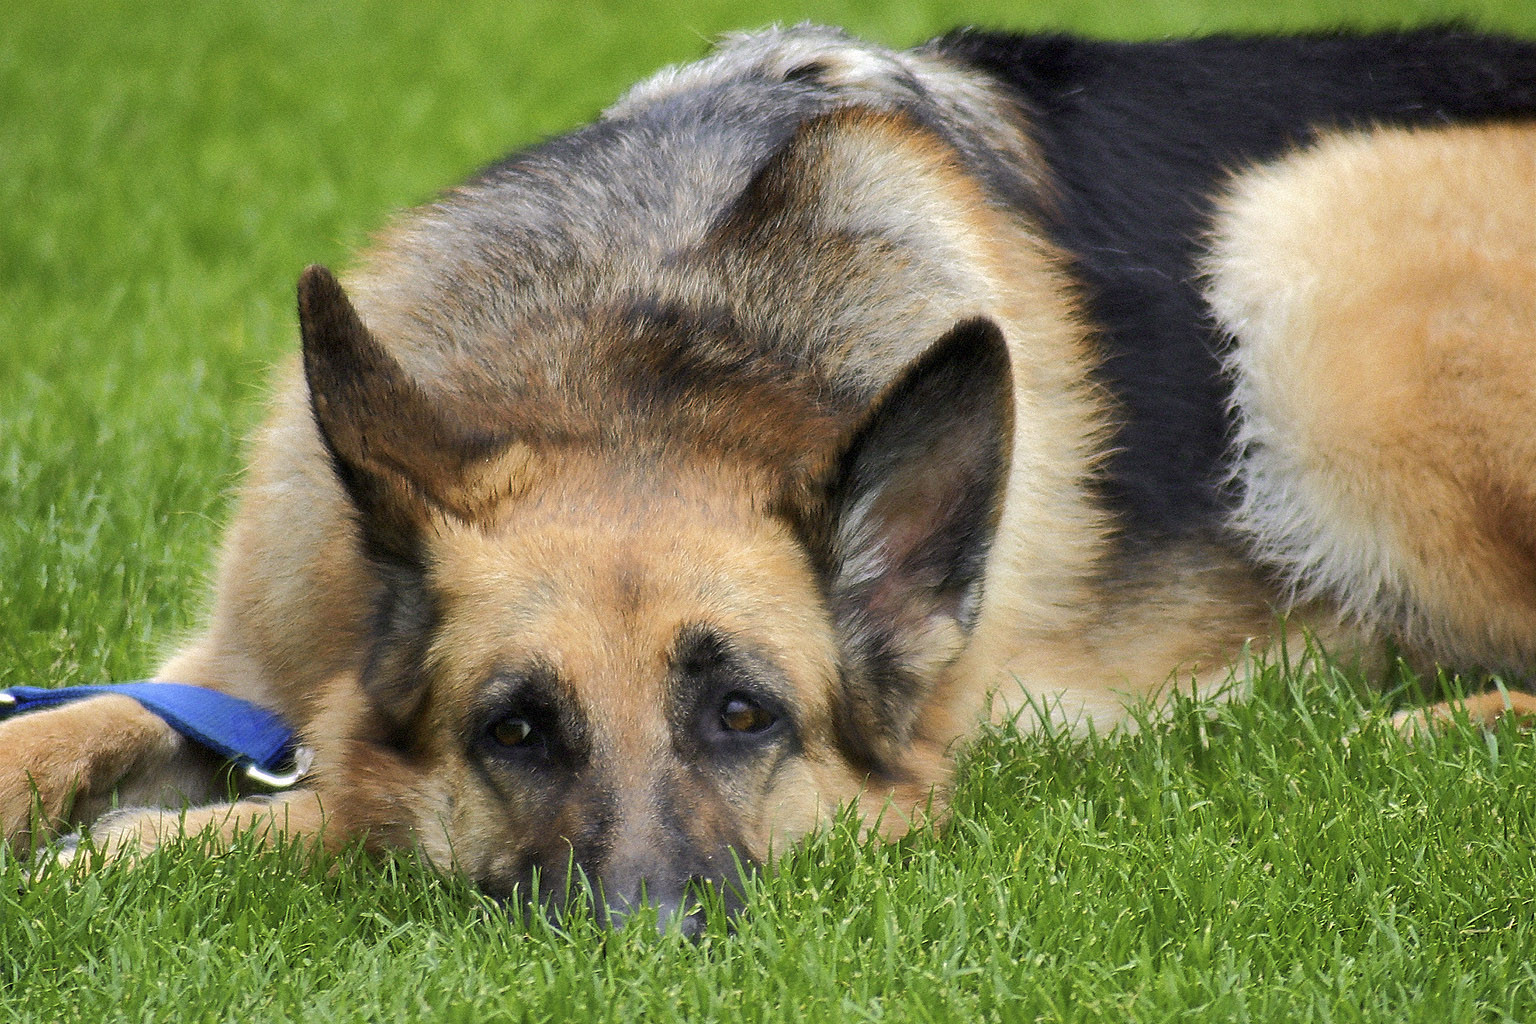 A German shepherd with his snout resting playfully in the grass.